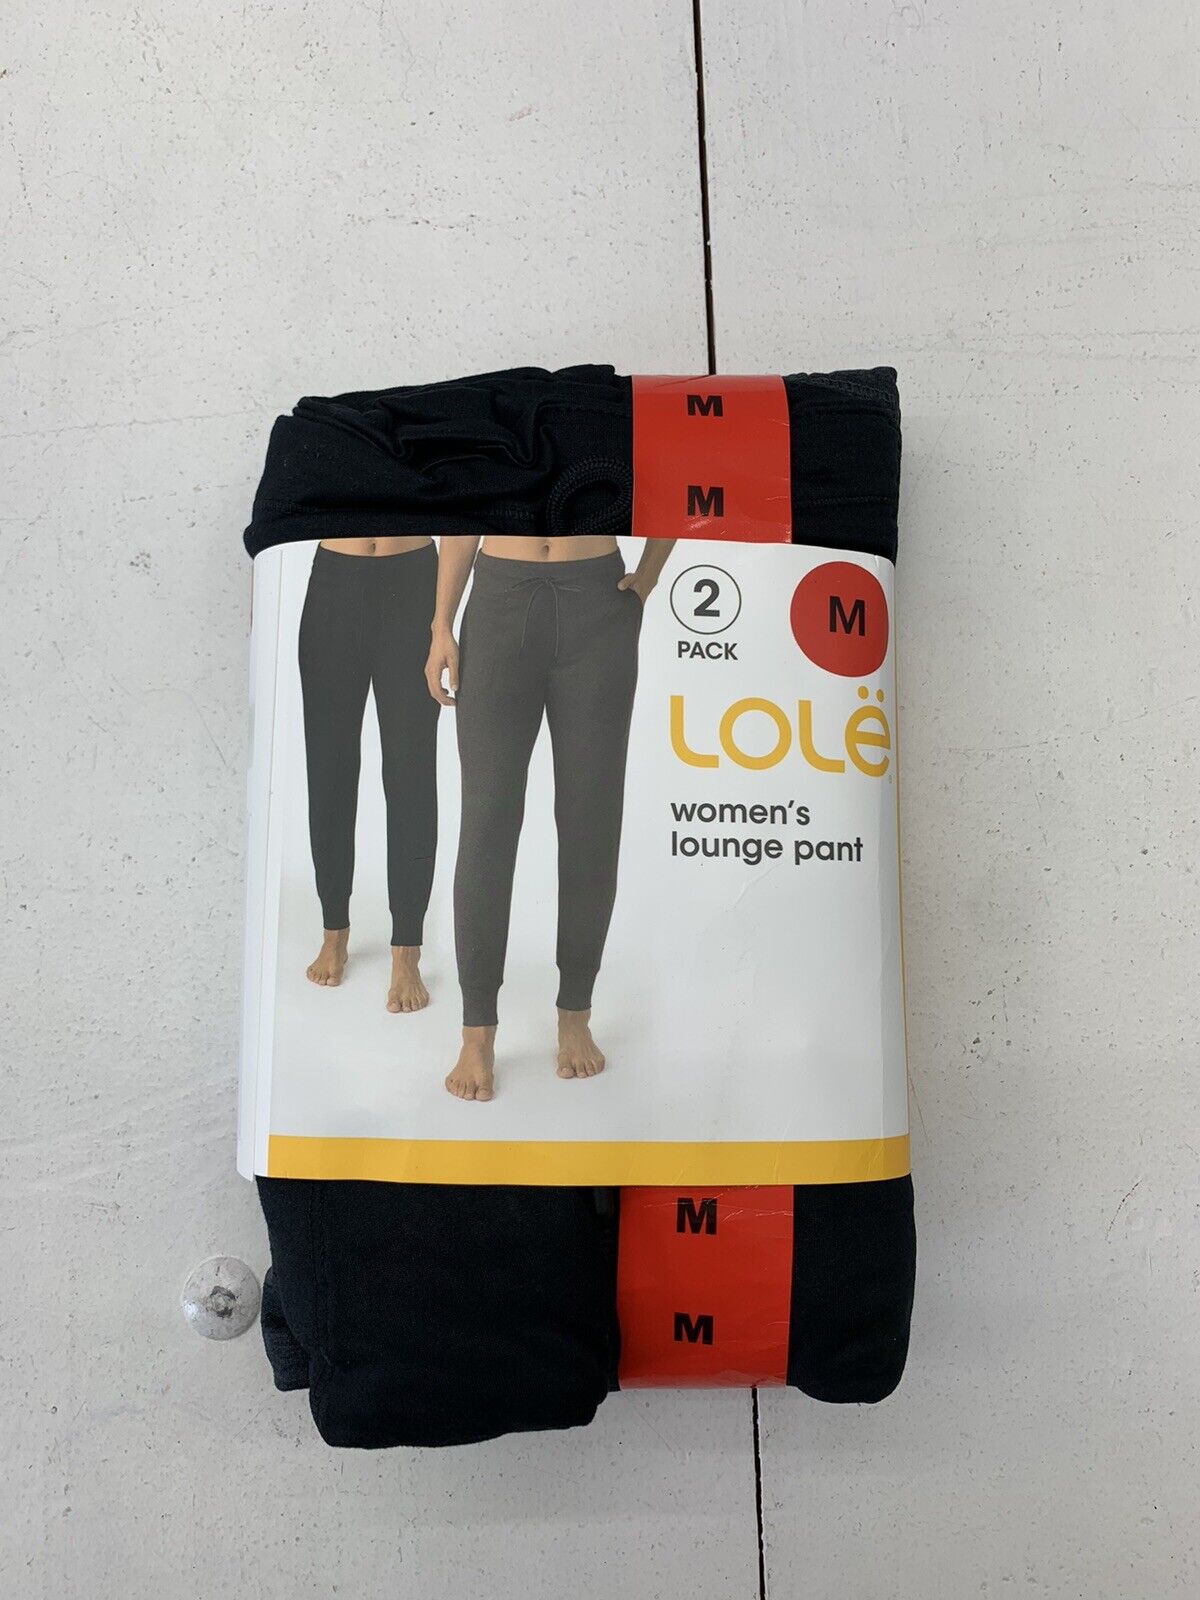 Lole Womens Lounge Pant - 2 Pack - Charcoal (grey) & Black Size